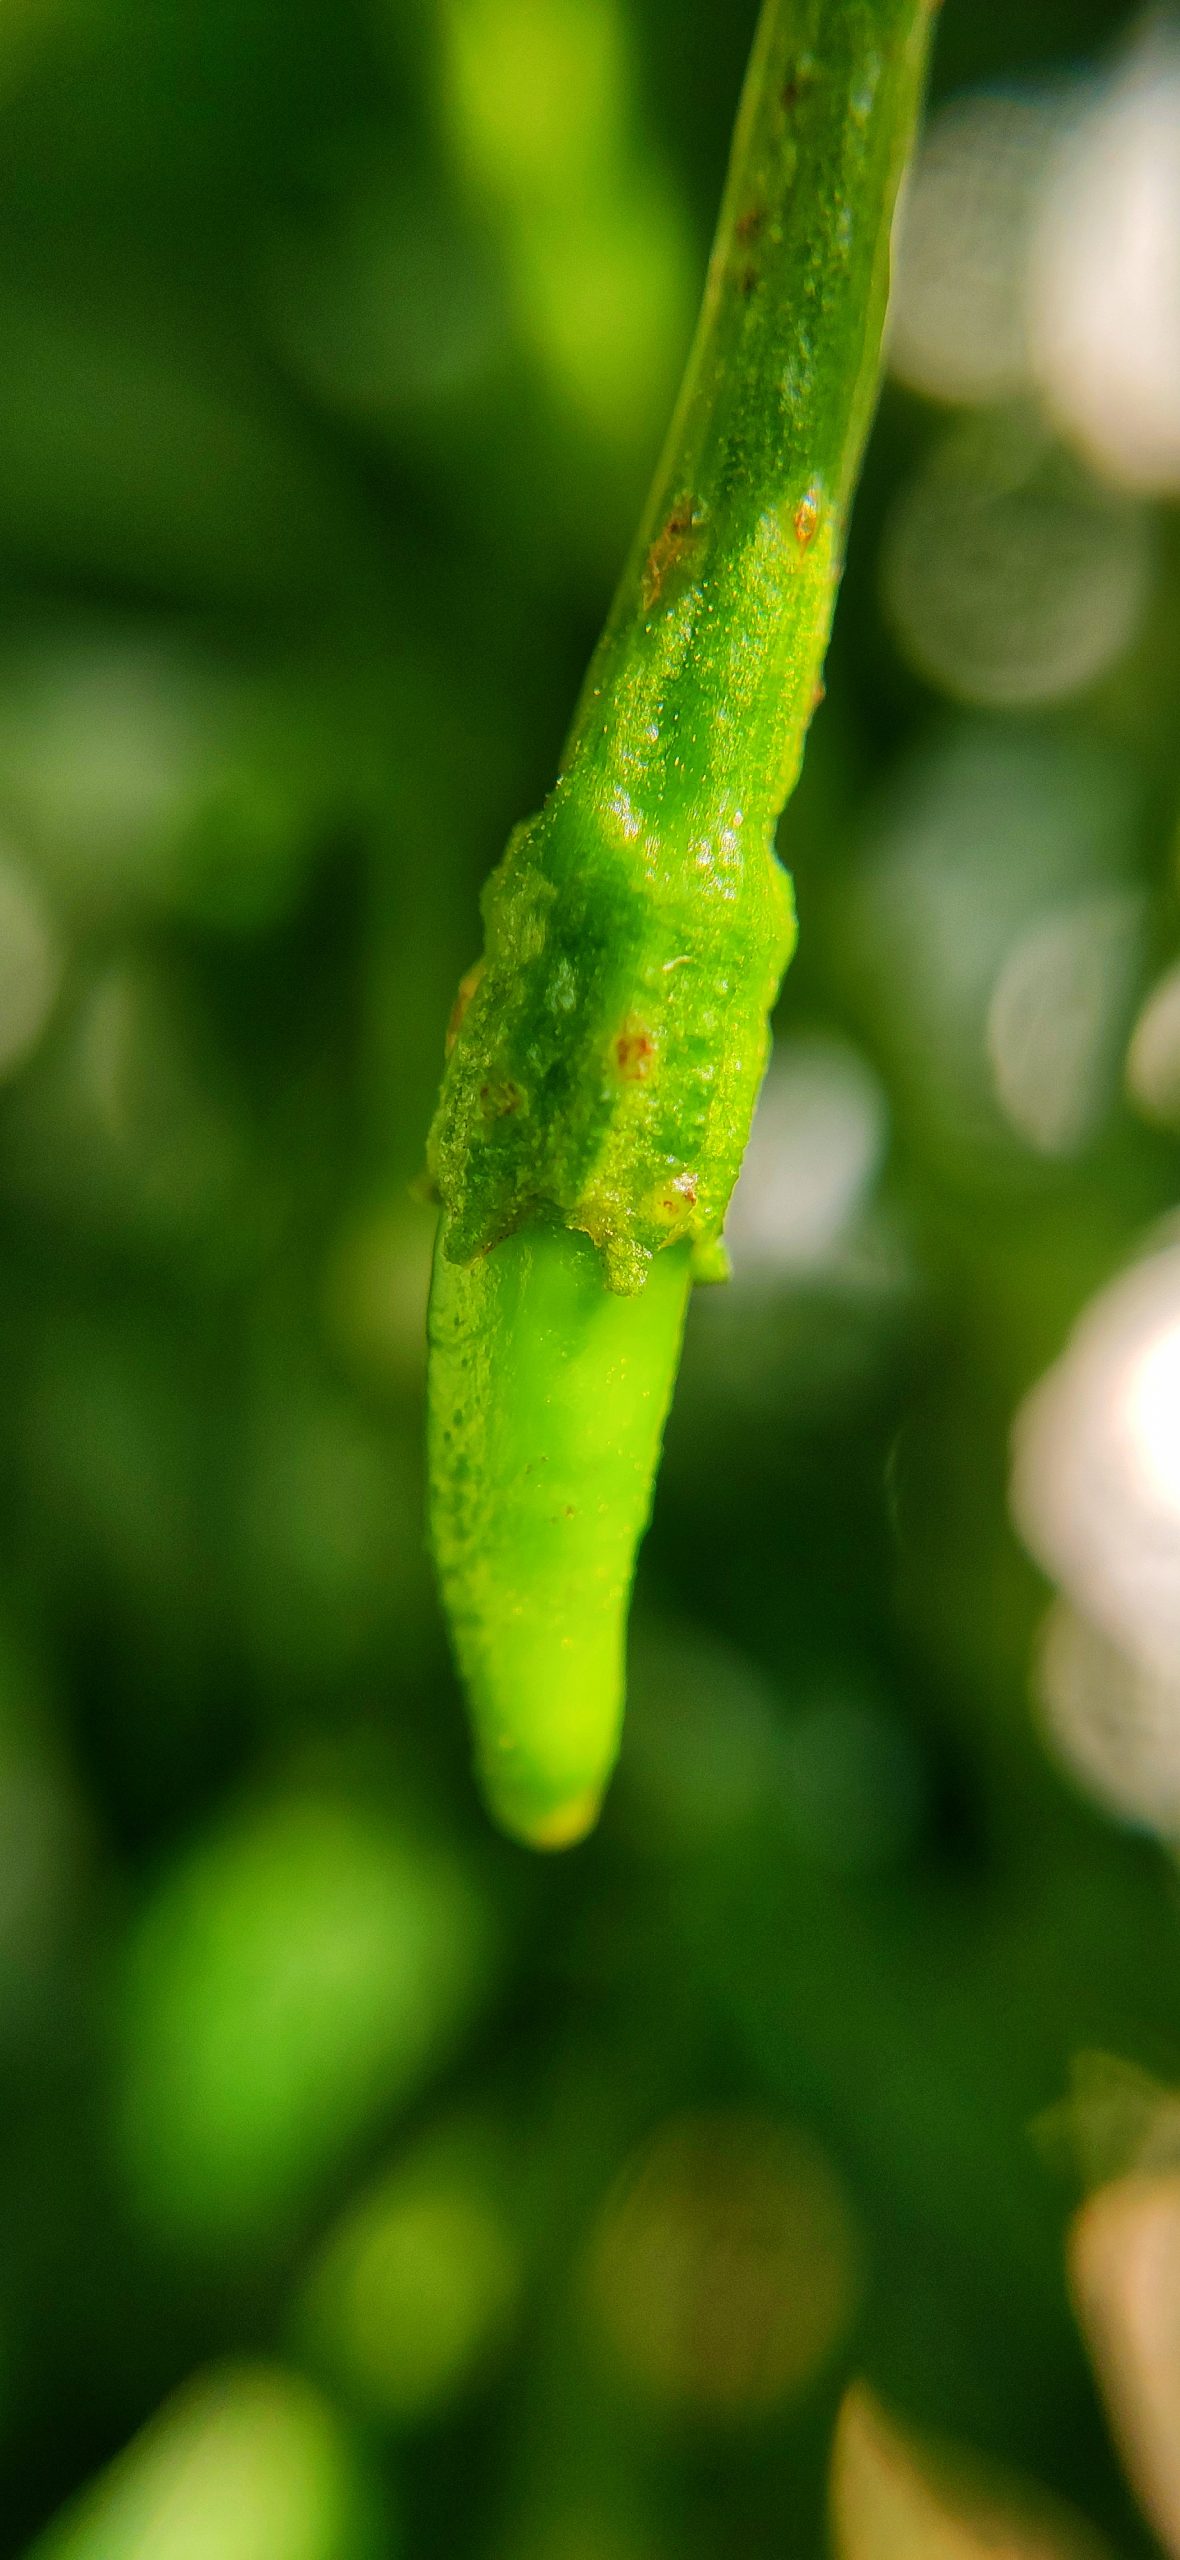 A growing chilli